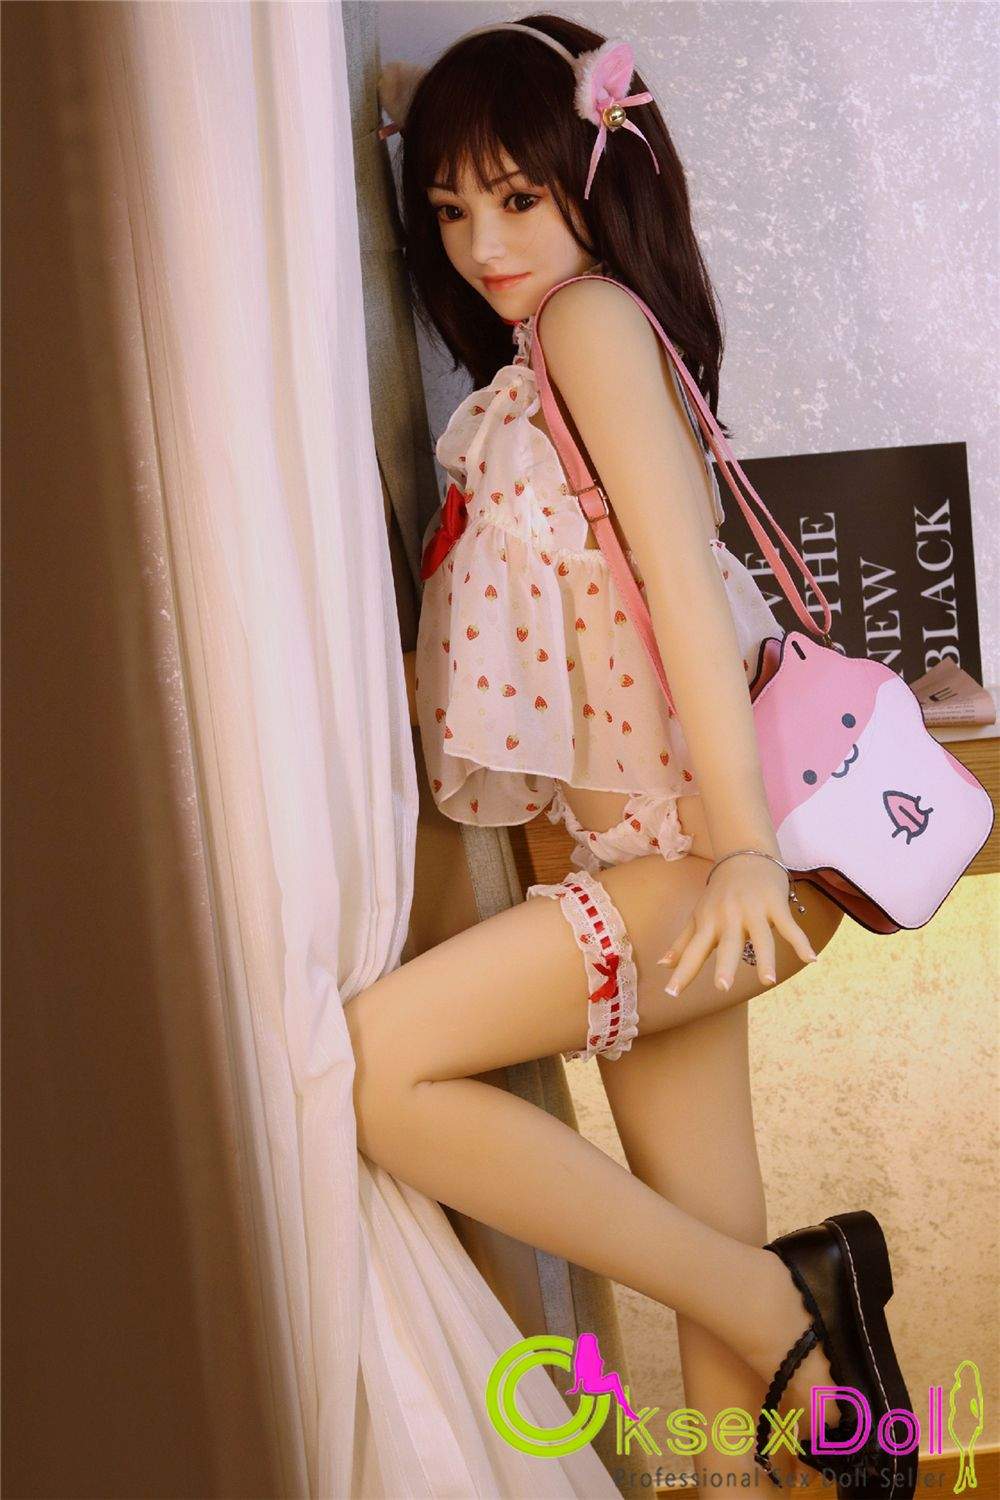 tiny young sex doll